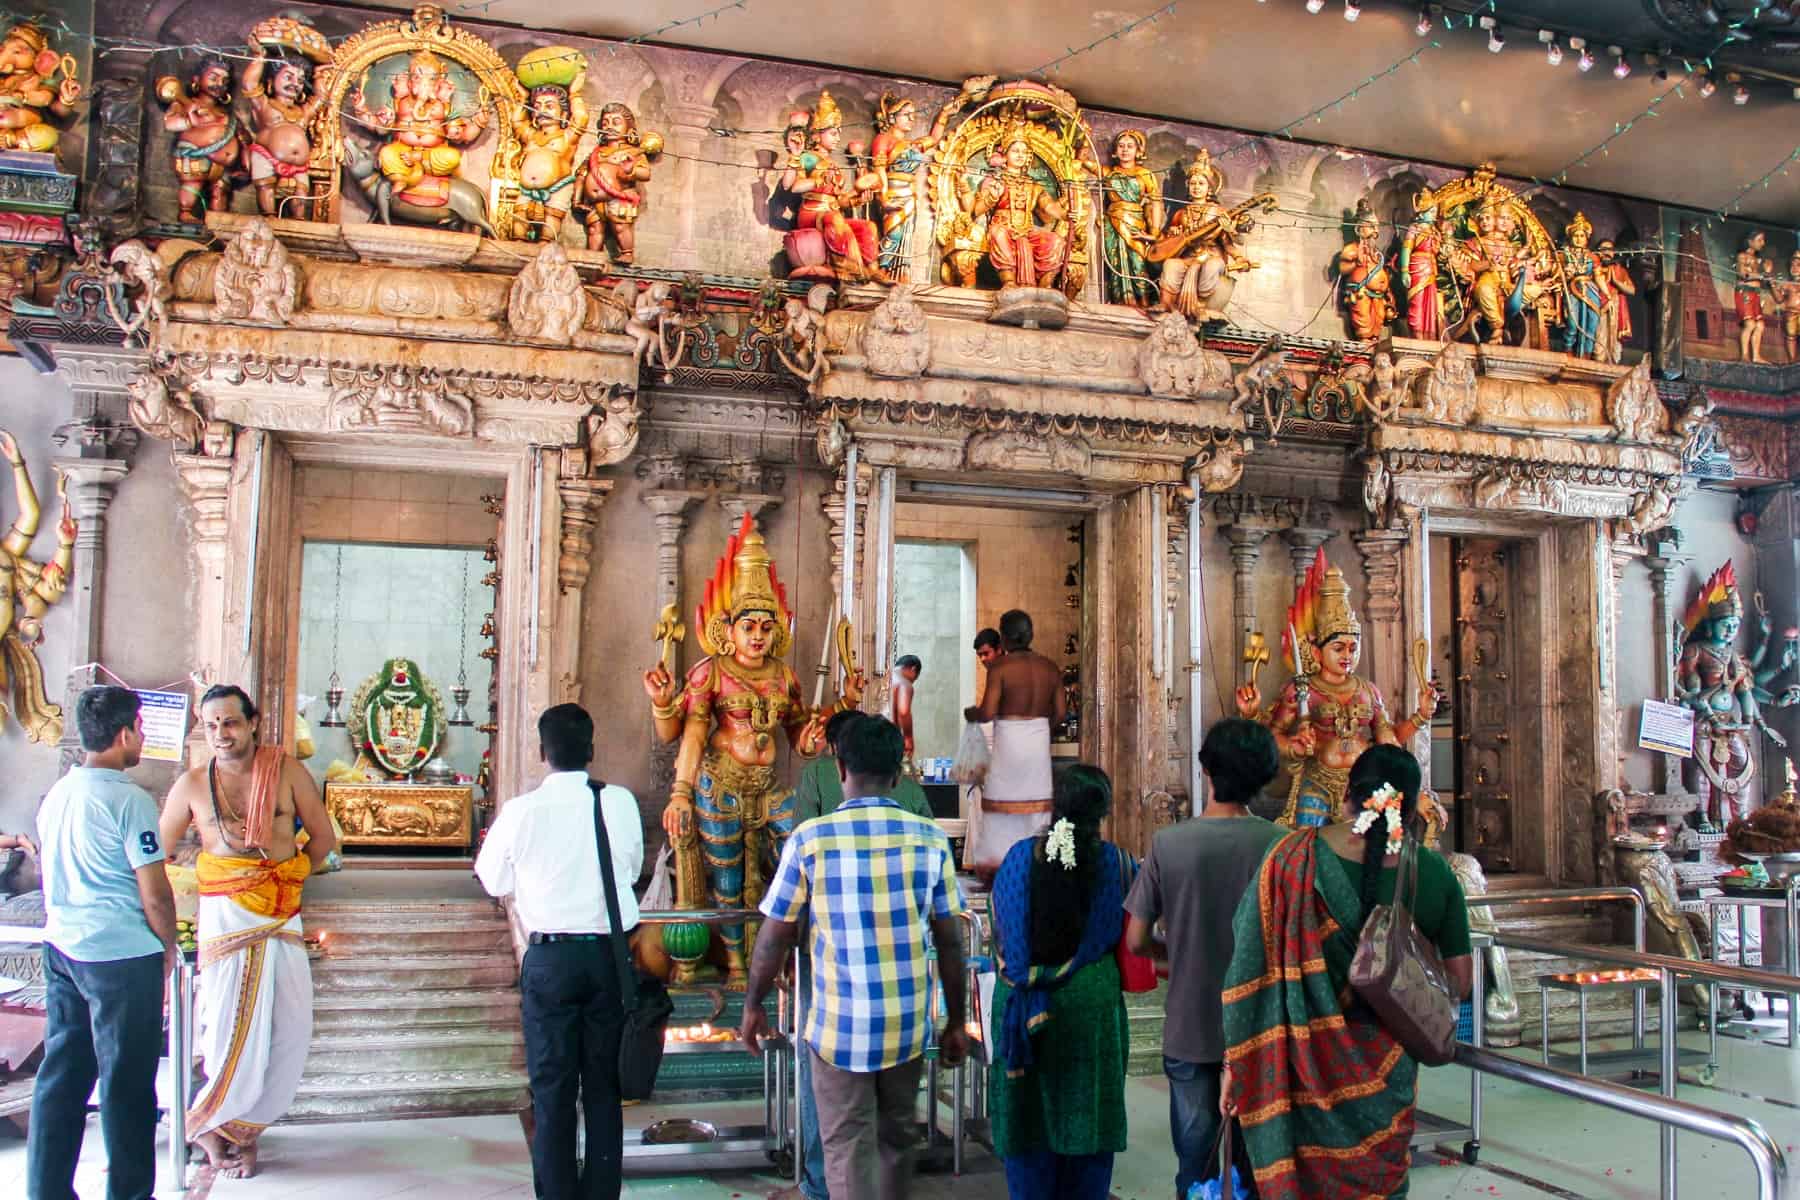 People pray inside the Sri Vadapathira Kaliamman temple in Singapore in front of three columned wall carvings, guarded by two Krishna statues